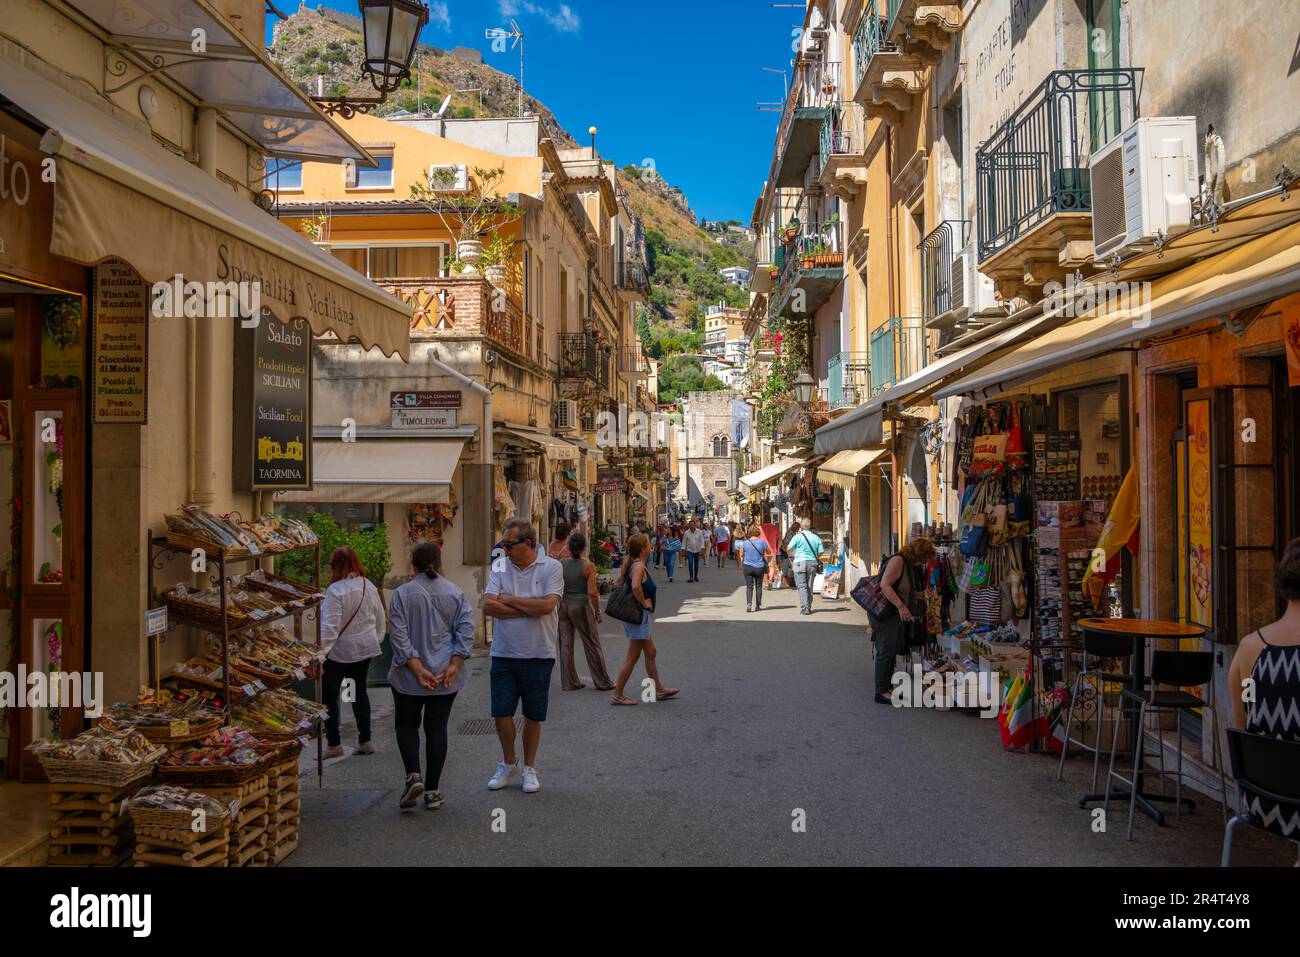 View of busy street and escalating hillside in background in Taormina, Taormina, Sicily, Italy, Europe Stock Photo